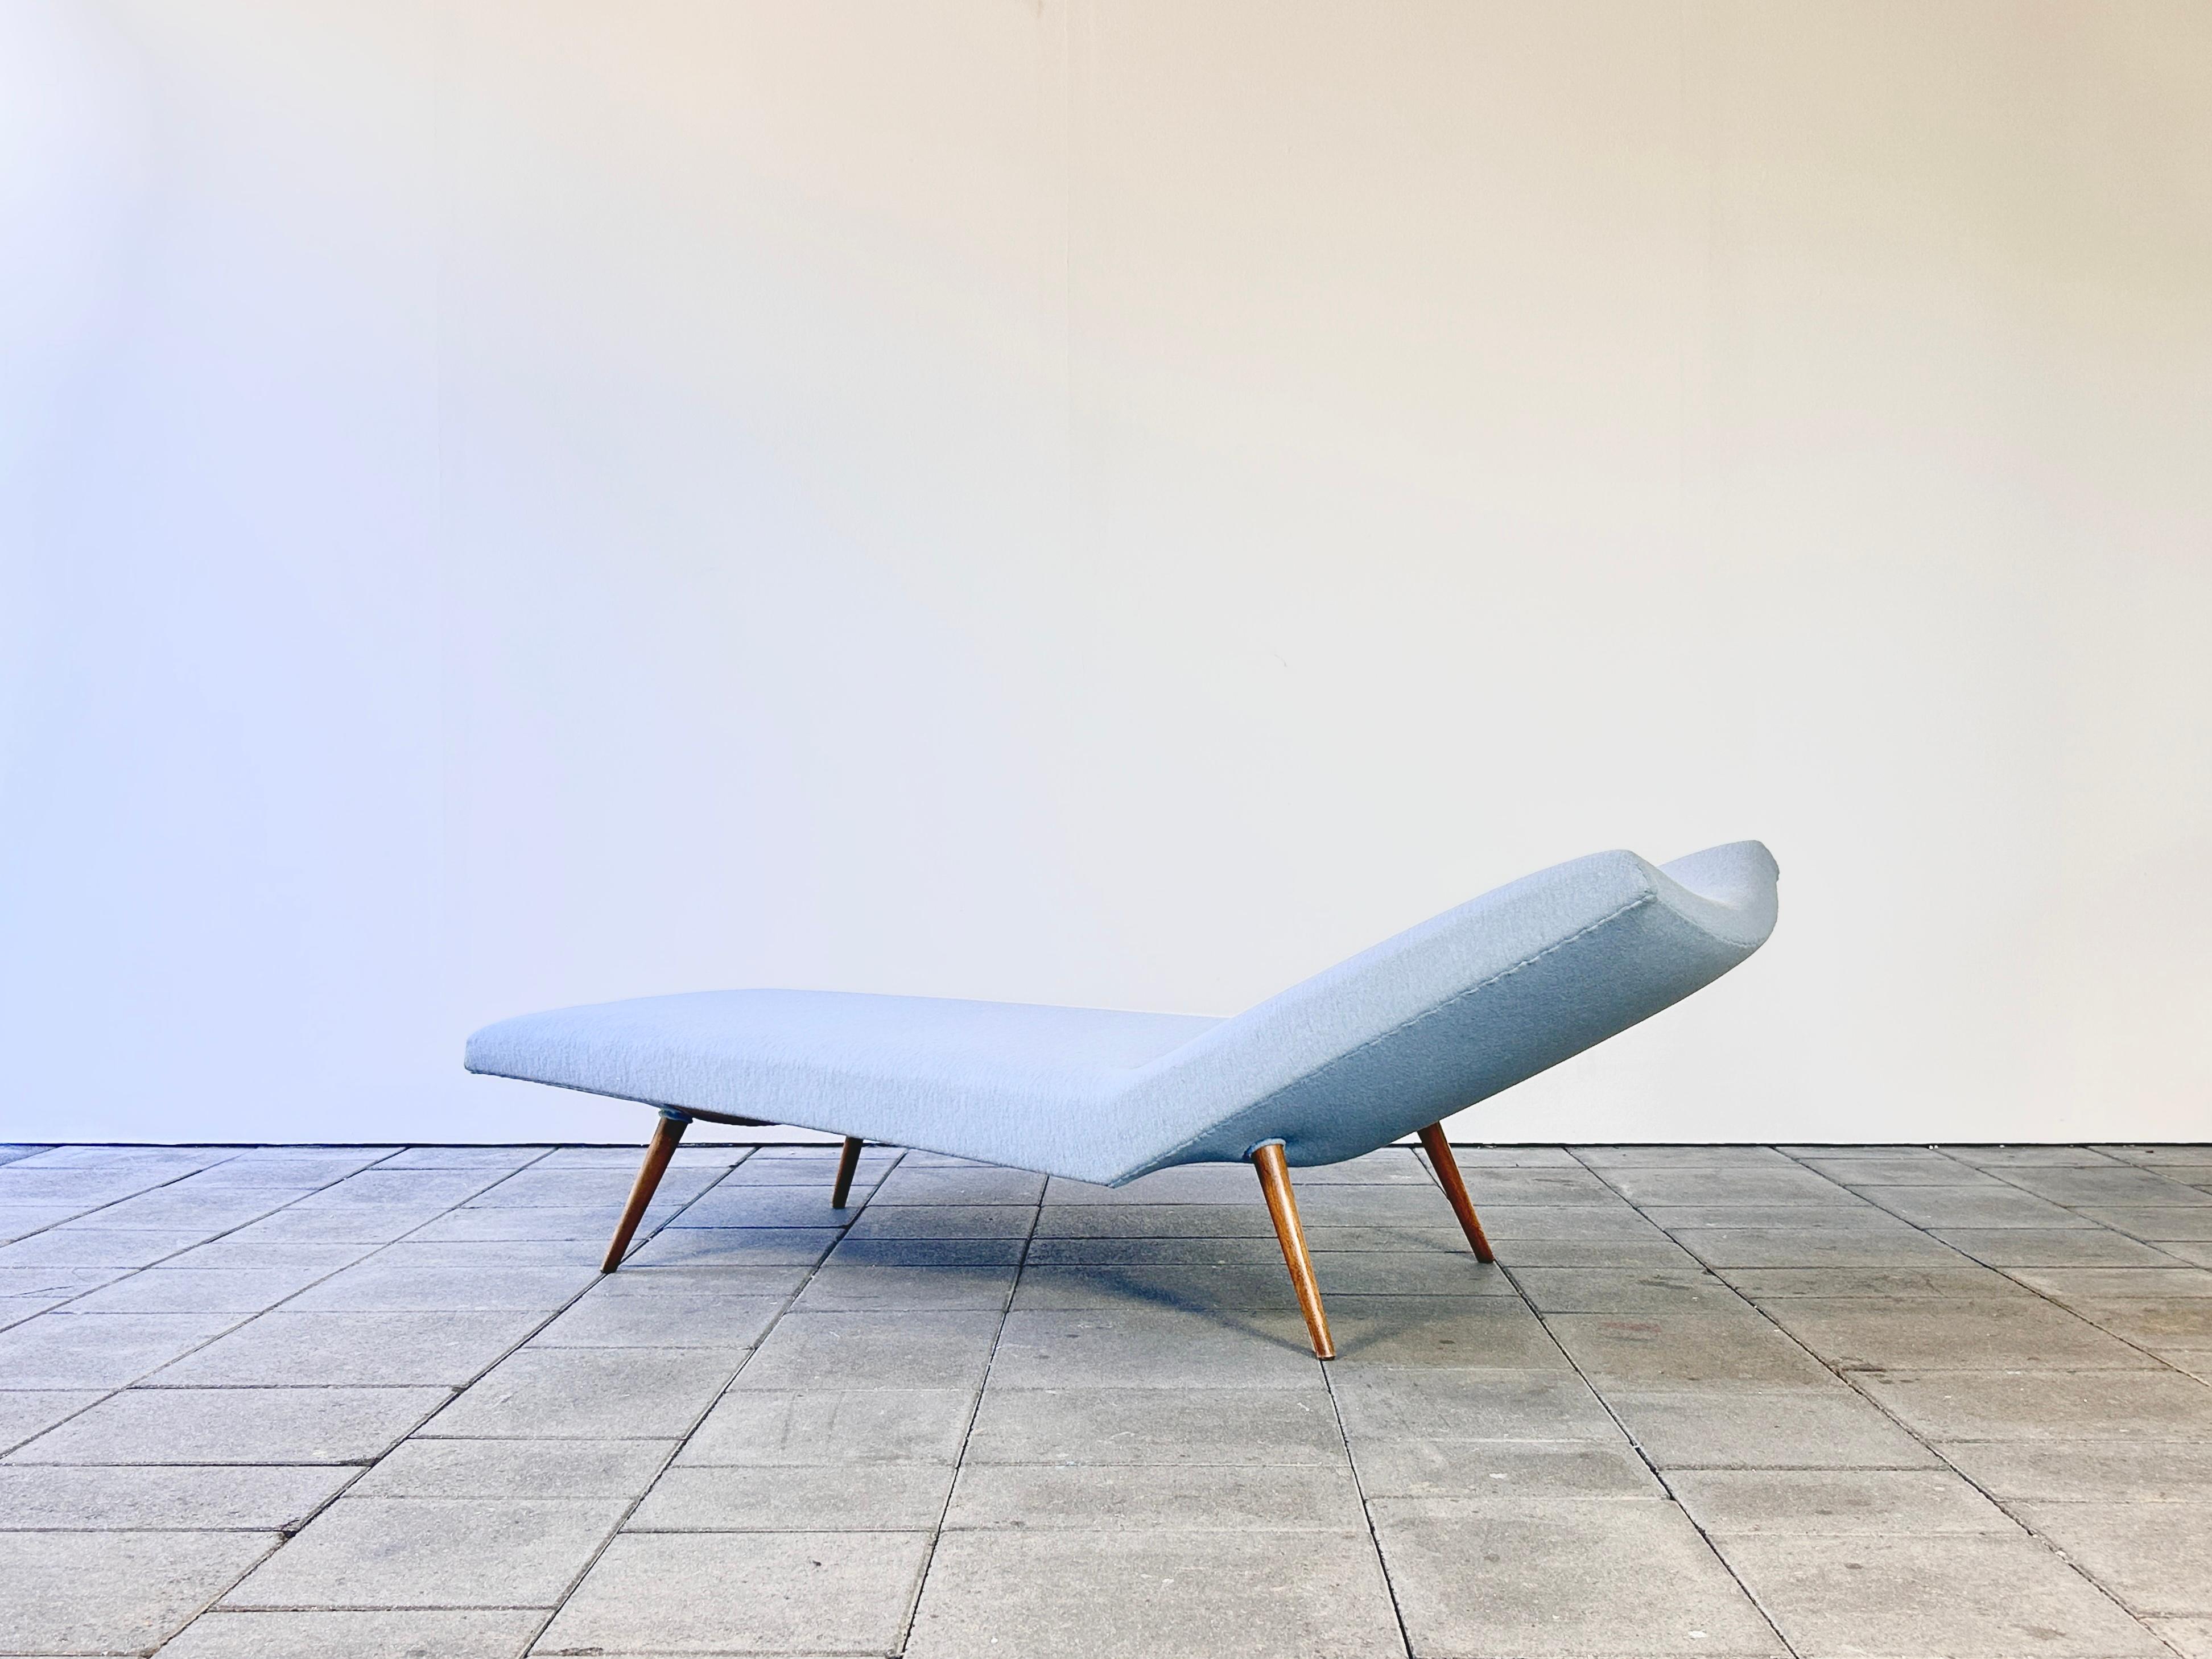 1950ies daybed designed by Theo Ruth for Artifort.

The daybed by Theo Ruth is characteristic for Theo Ruth’s attitude towards designing. With it’s organic shape and due to its elegant outlines and proportions it has almost sculptural quality.